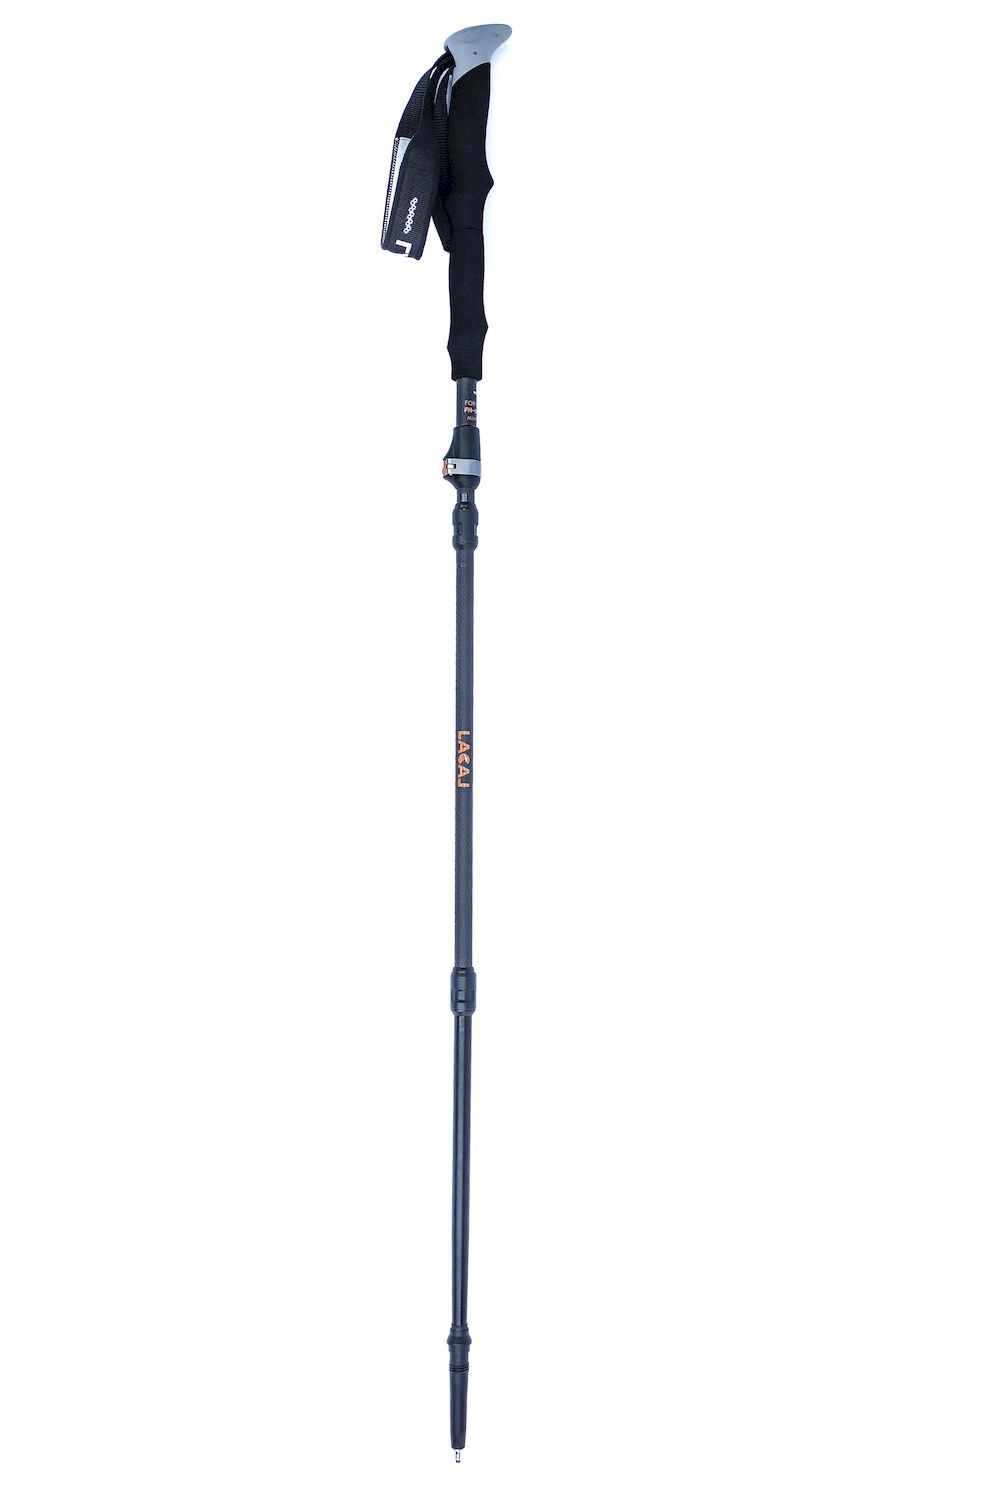 Lacal Quick Stick Compact Carbone - Walking poles